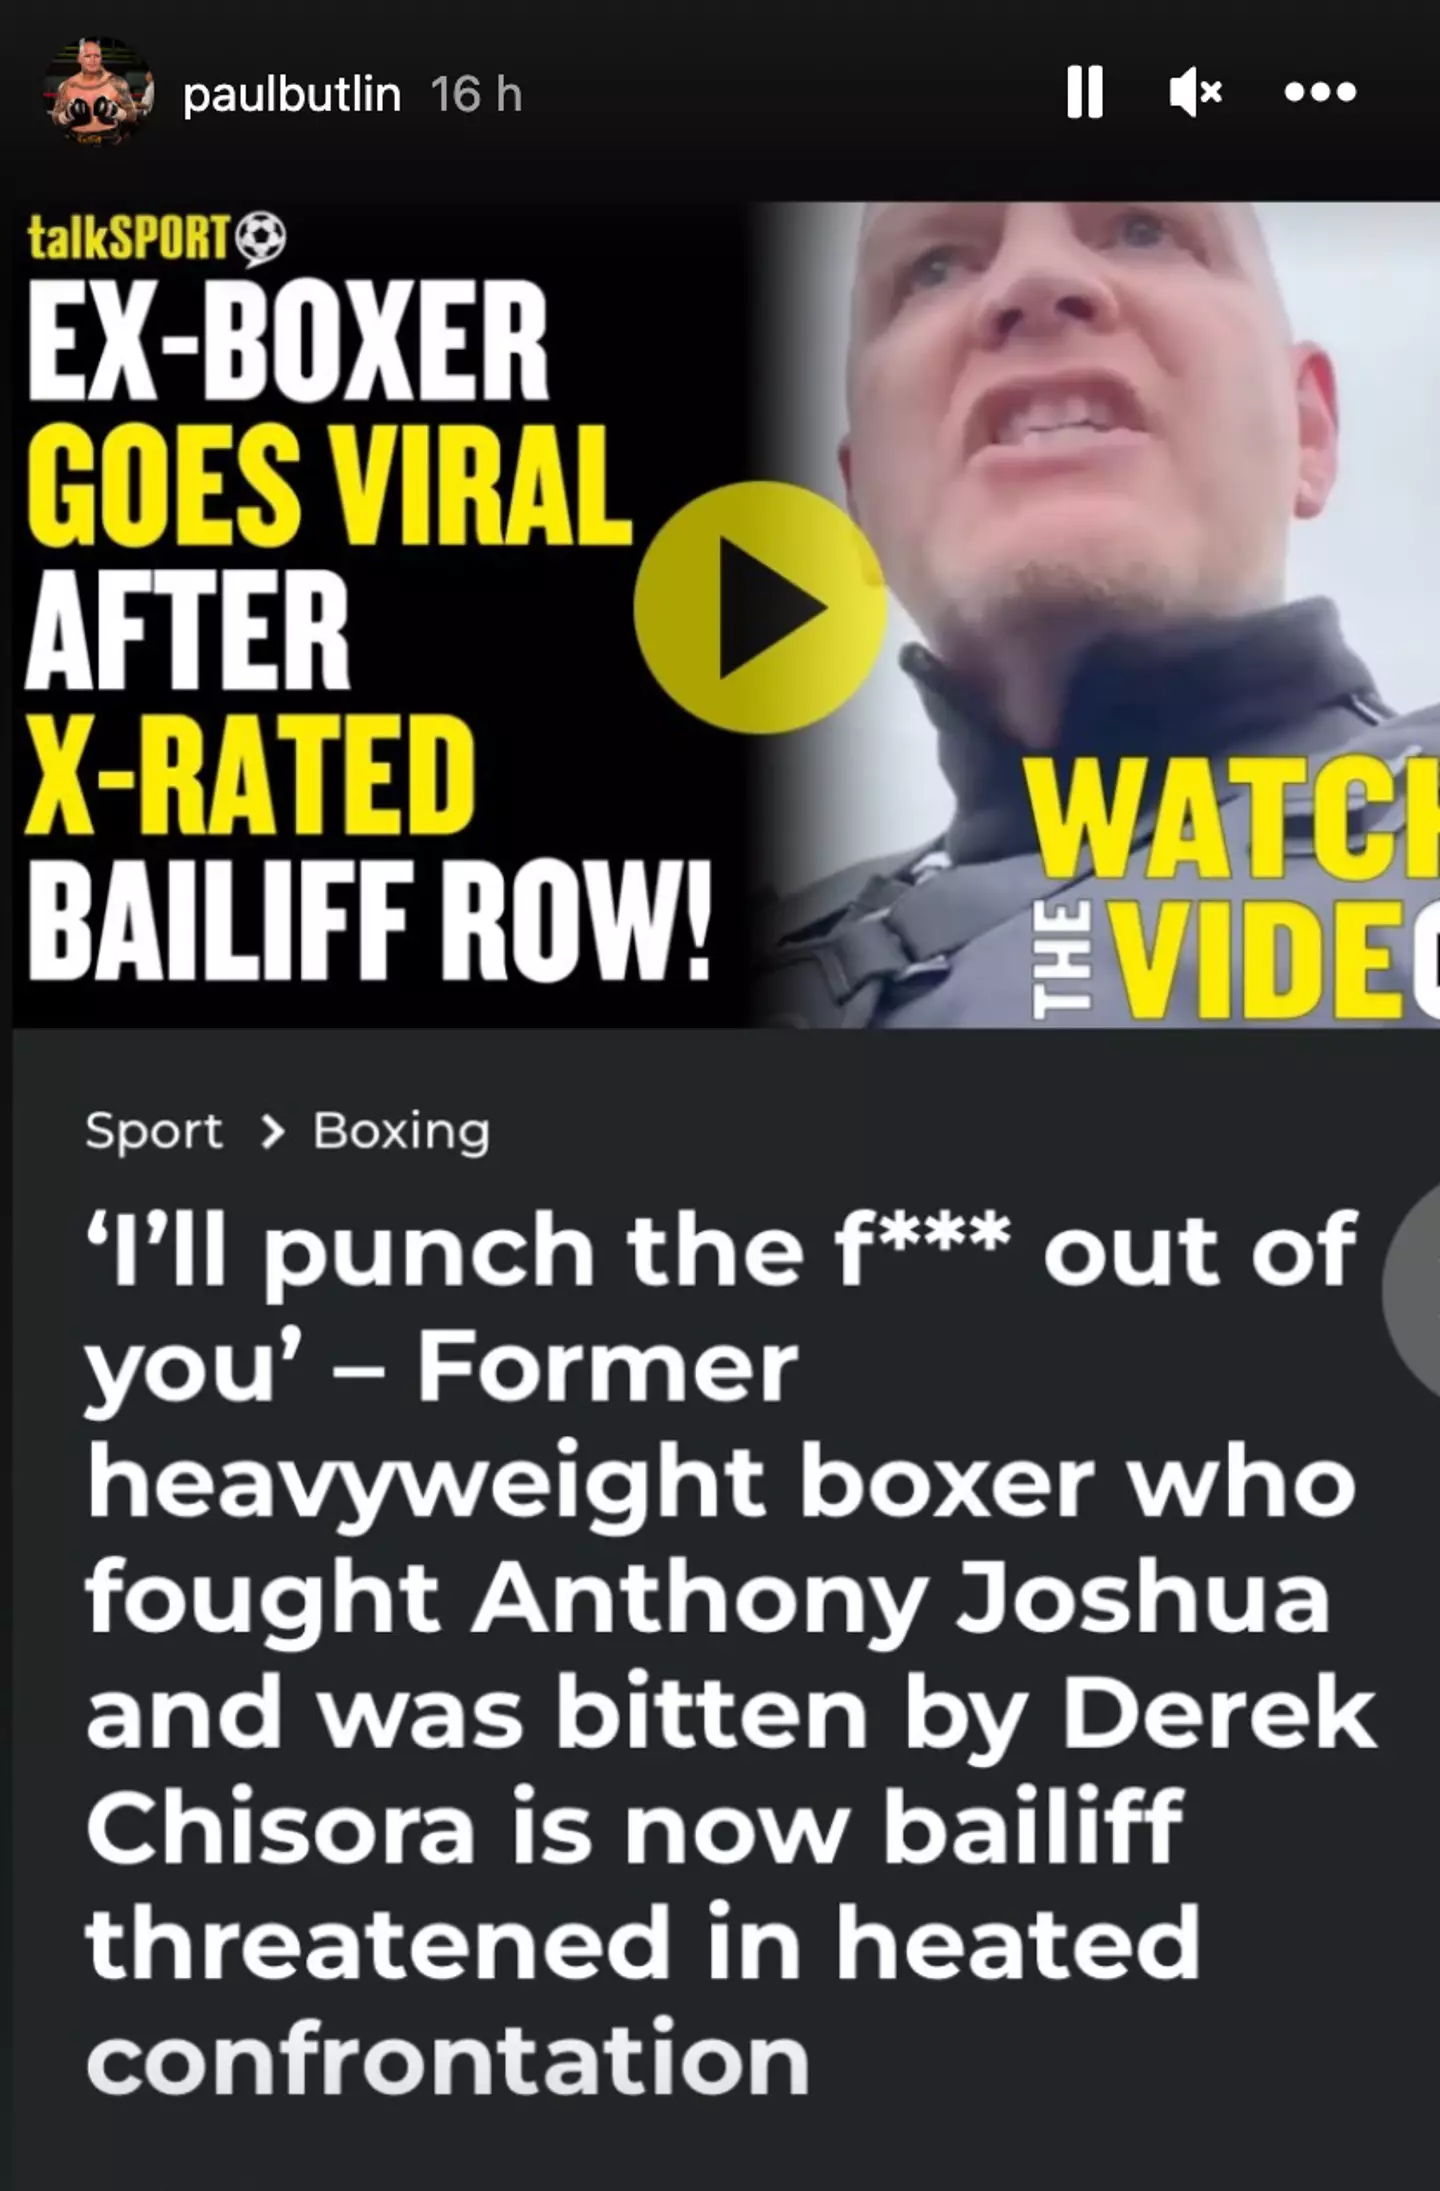 The ex-boxer reacted to the viral clip on Instagram.